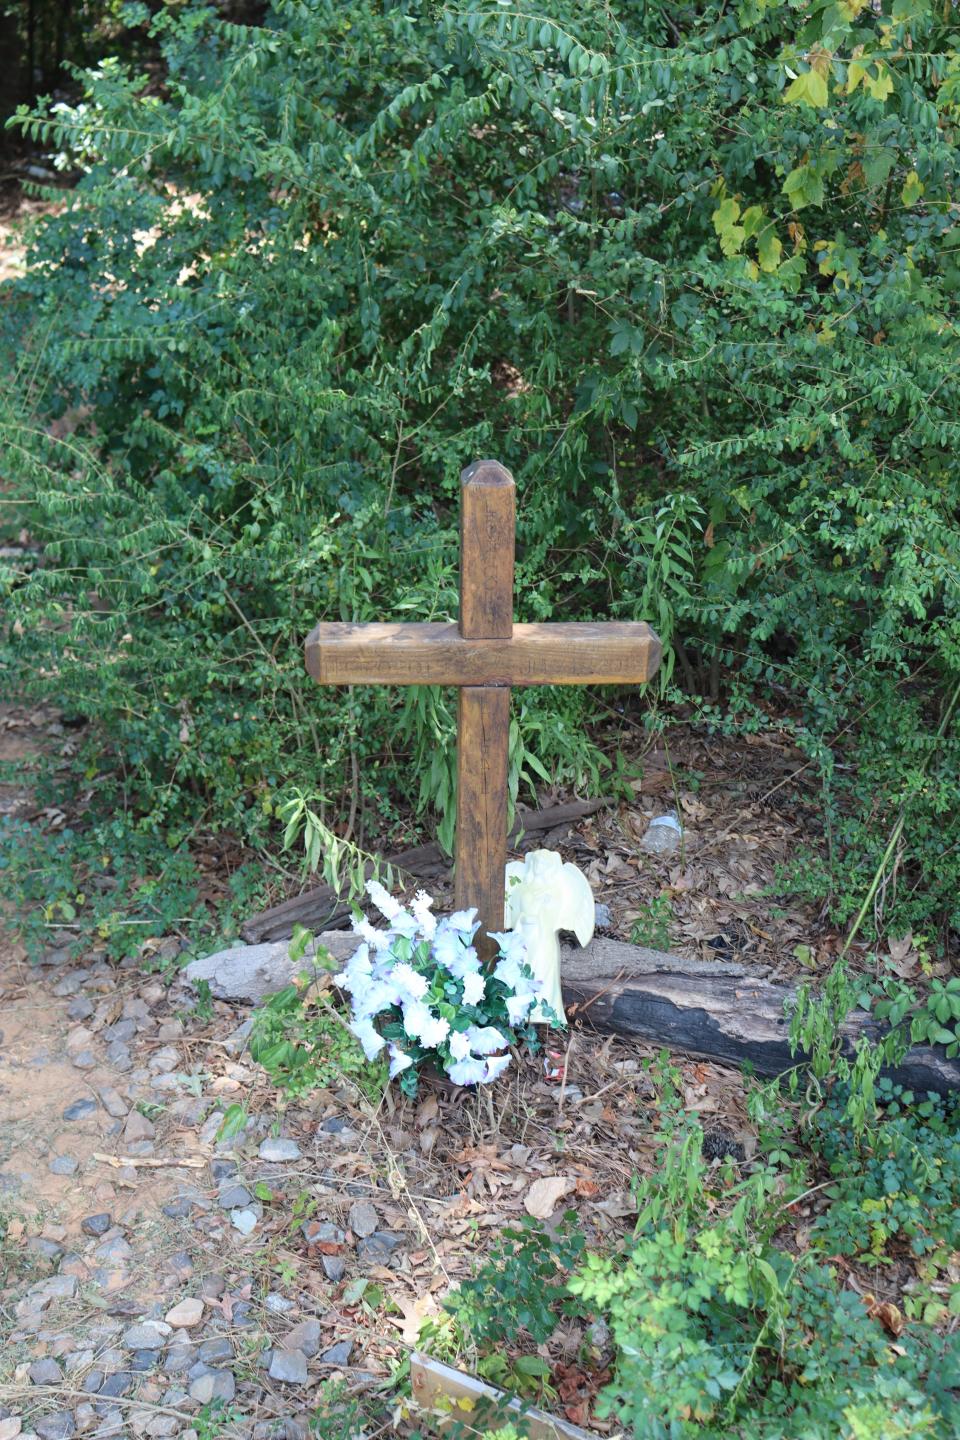 A cross was placed at the site where 6-month-old Levi Cole Ellerbe was found on the night of July 17, 2018, off Breda Avenue in Natchitoches. He died hours later at a Shreveport hospital after suffering burns over most of his body.